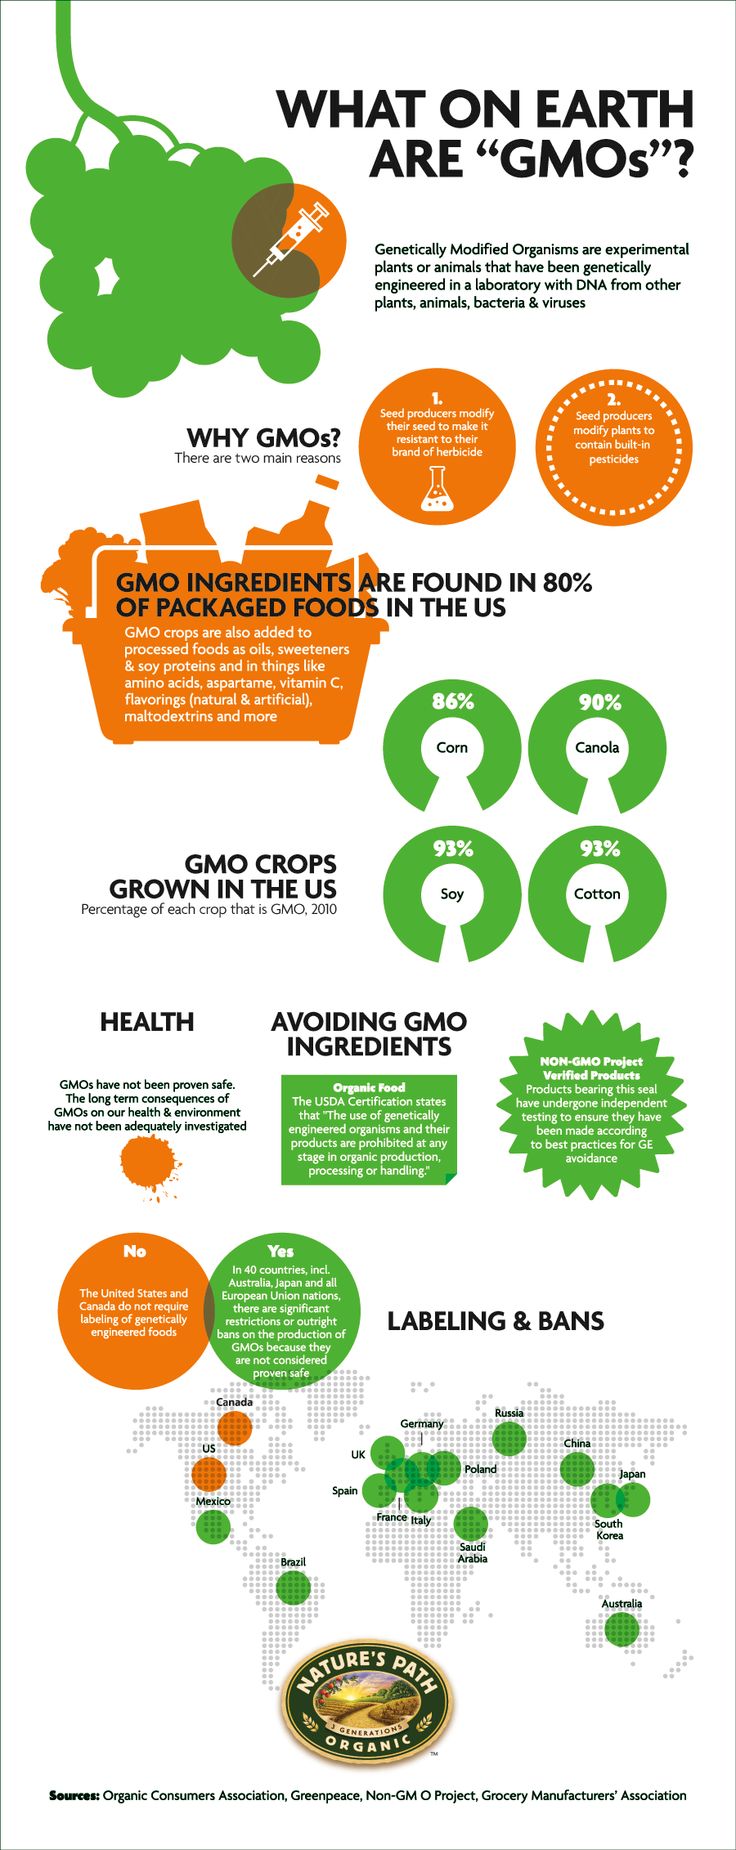 What On Earth Are GMOs?